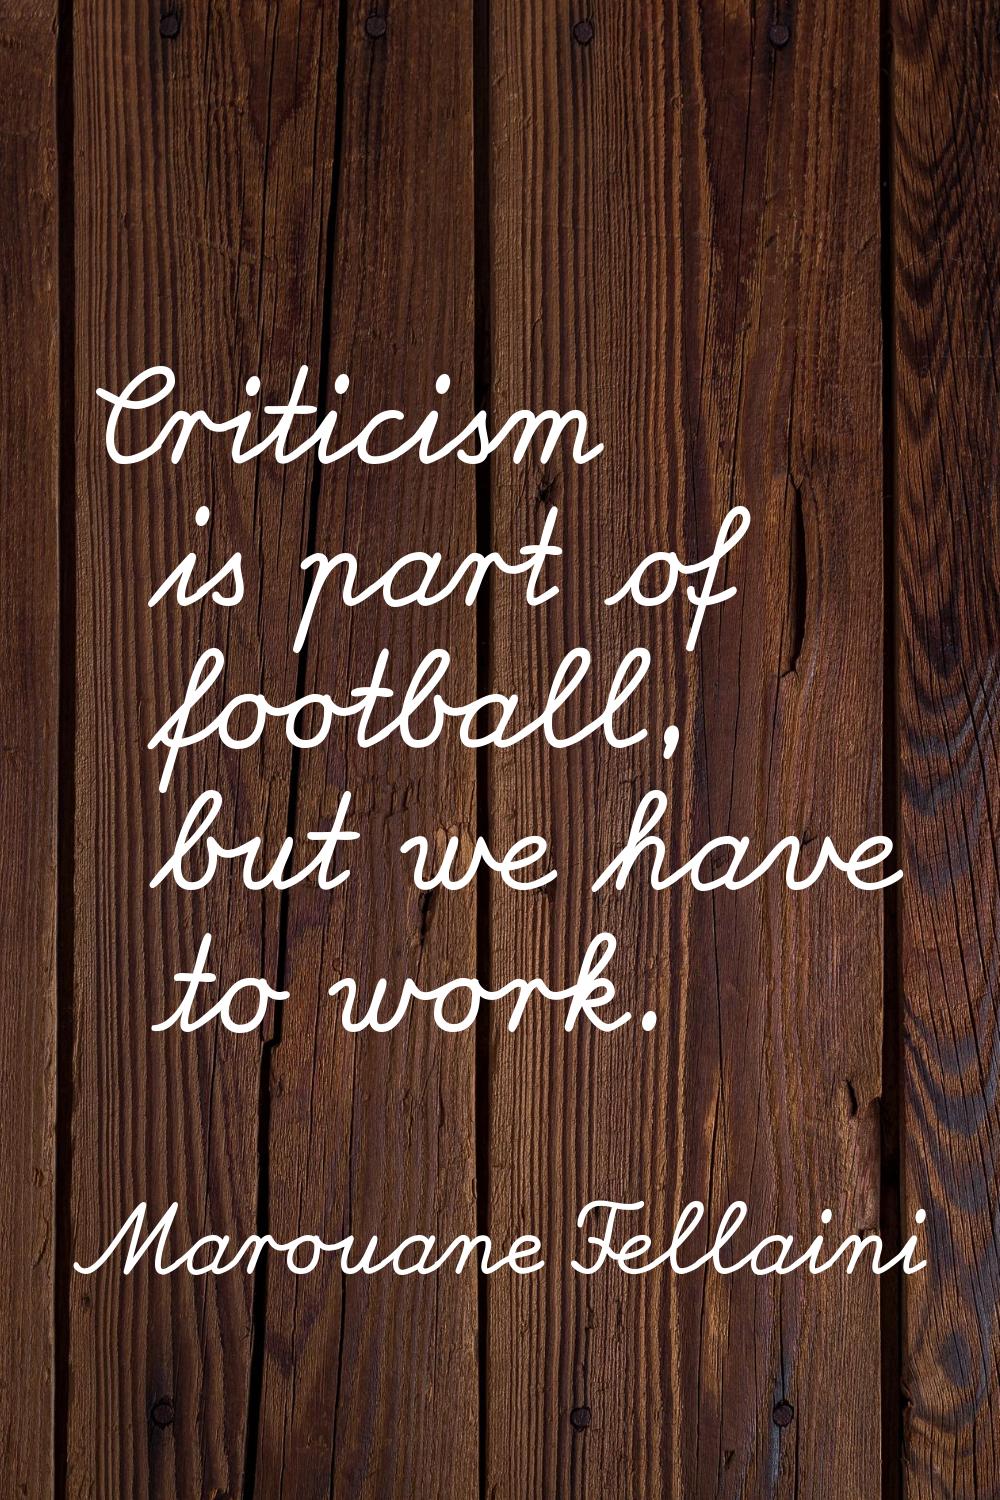 Criticism is part of football, but we have to work.